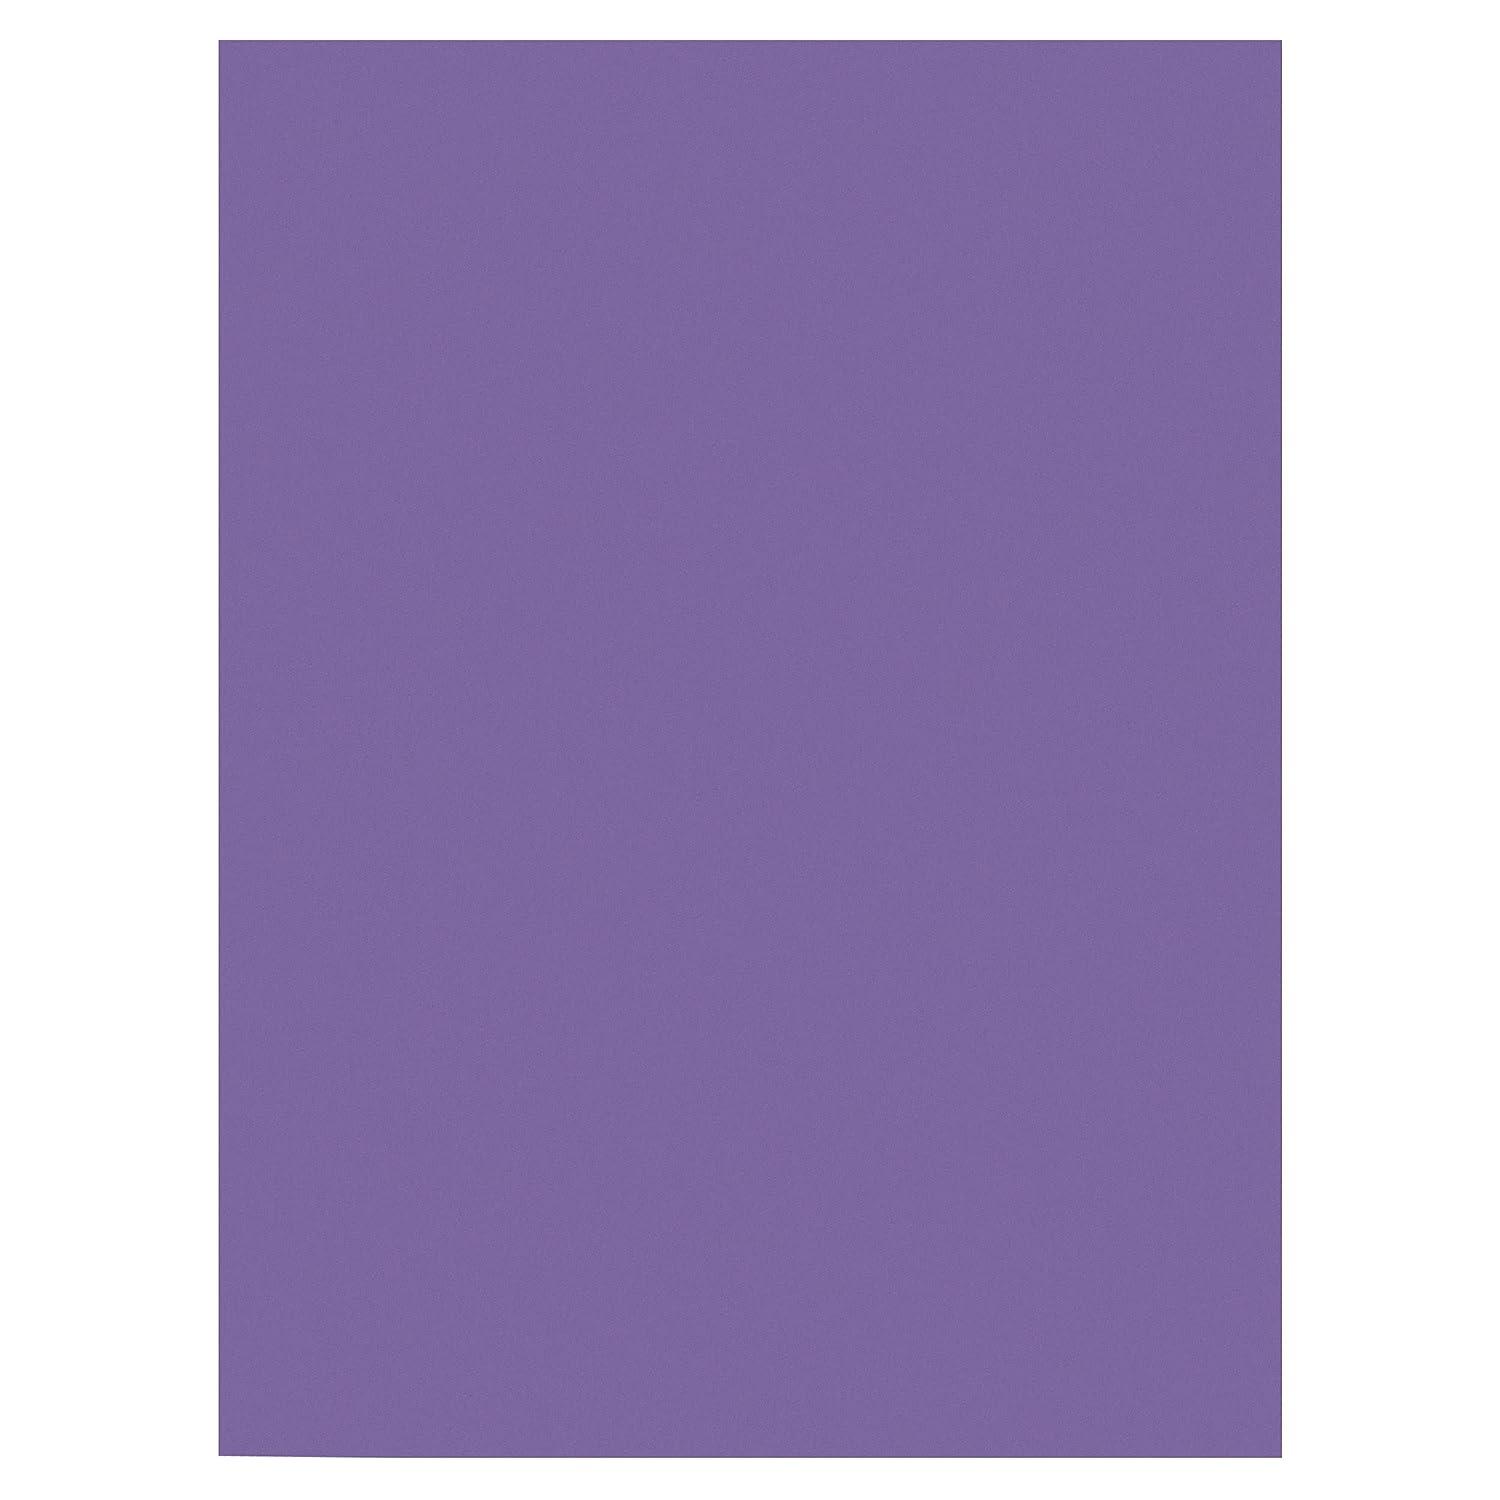  Prang (Formerly SunWorks) Construction Paper, Bright Blue, 9  x 12, 100 Sheets : Arts, Crafts & Sewing